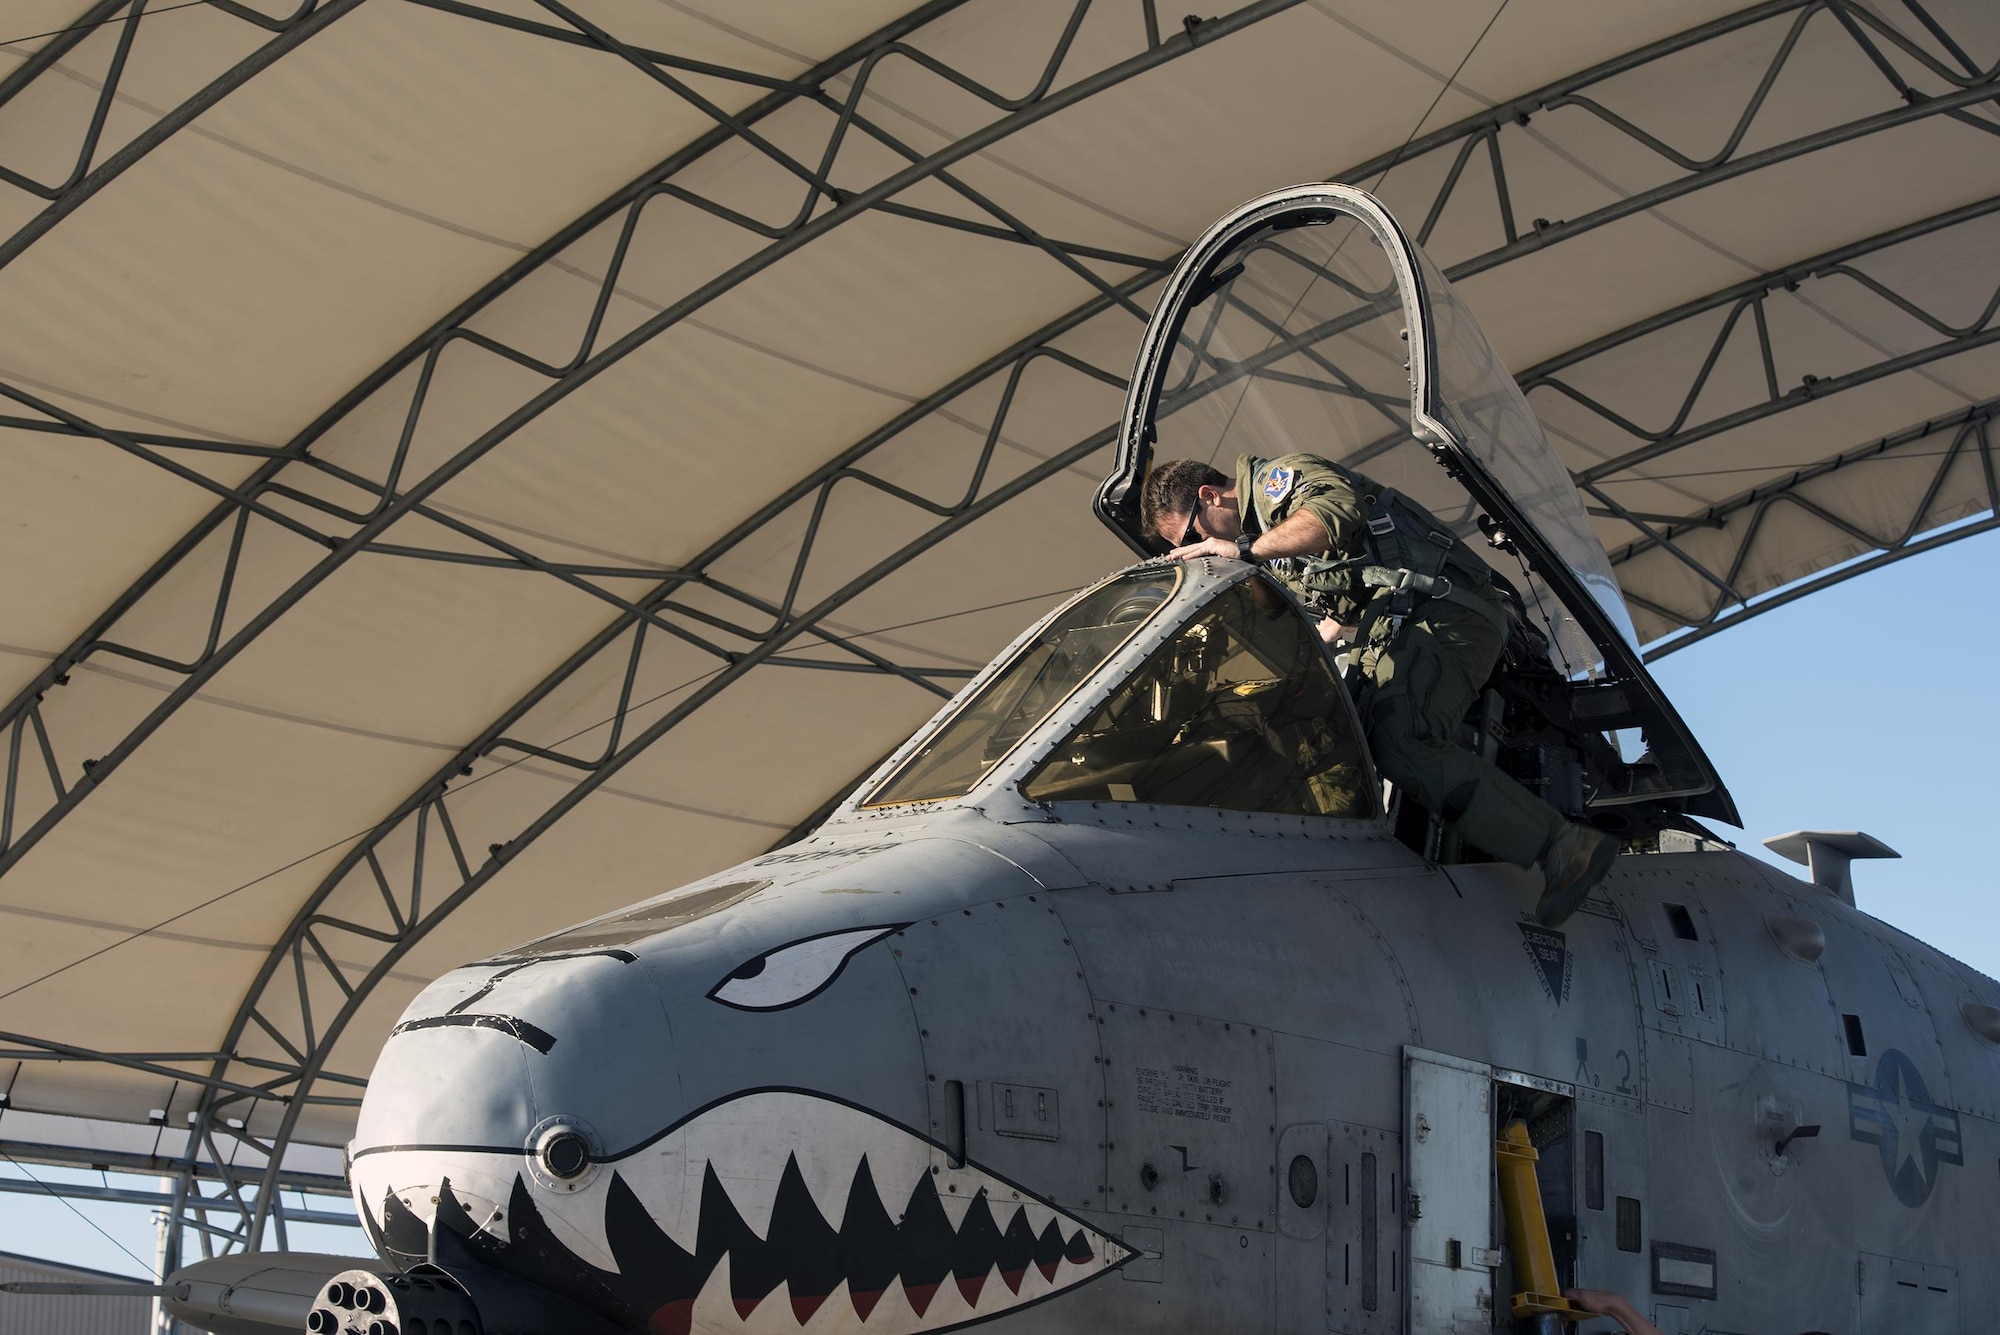 Capt. Andrew Nemethy, 74th Fighter Squadron A-10C Thunderbolt II pilot, climbs into the cockpit of an A-10 prior to launching for Green Flag-West, Jan. 12, 2017, at Moody Air Force Base, Ga. All four military branches, including the guard and reserve components, participate in two Green Flag exercises annually. Green Flag exercises provide joint training for approximately 75,000 joint and coalition personnel each year. (U.S. Air Force photo by Airman 1st Class Greg Nash)